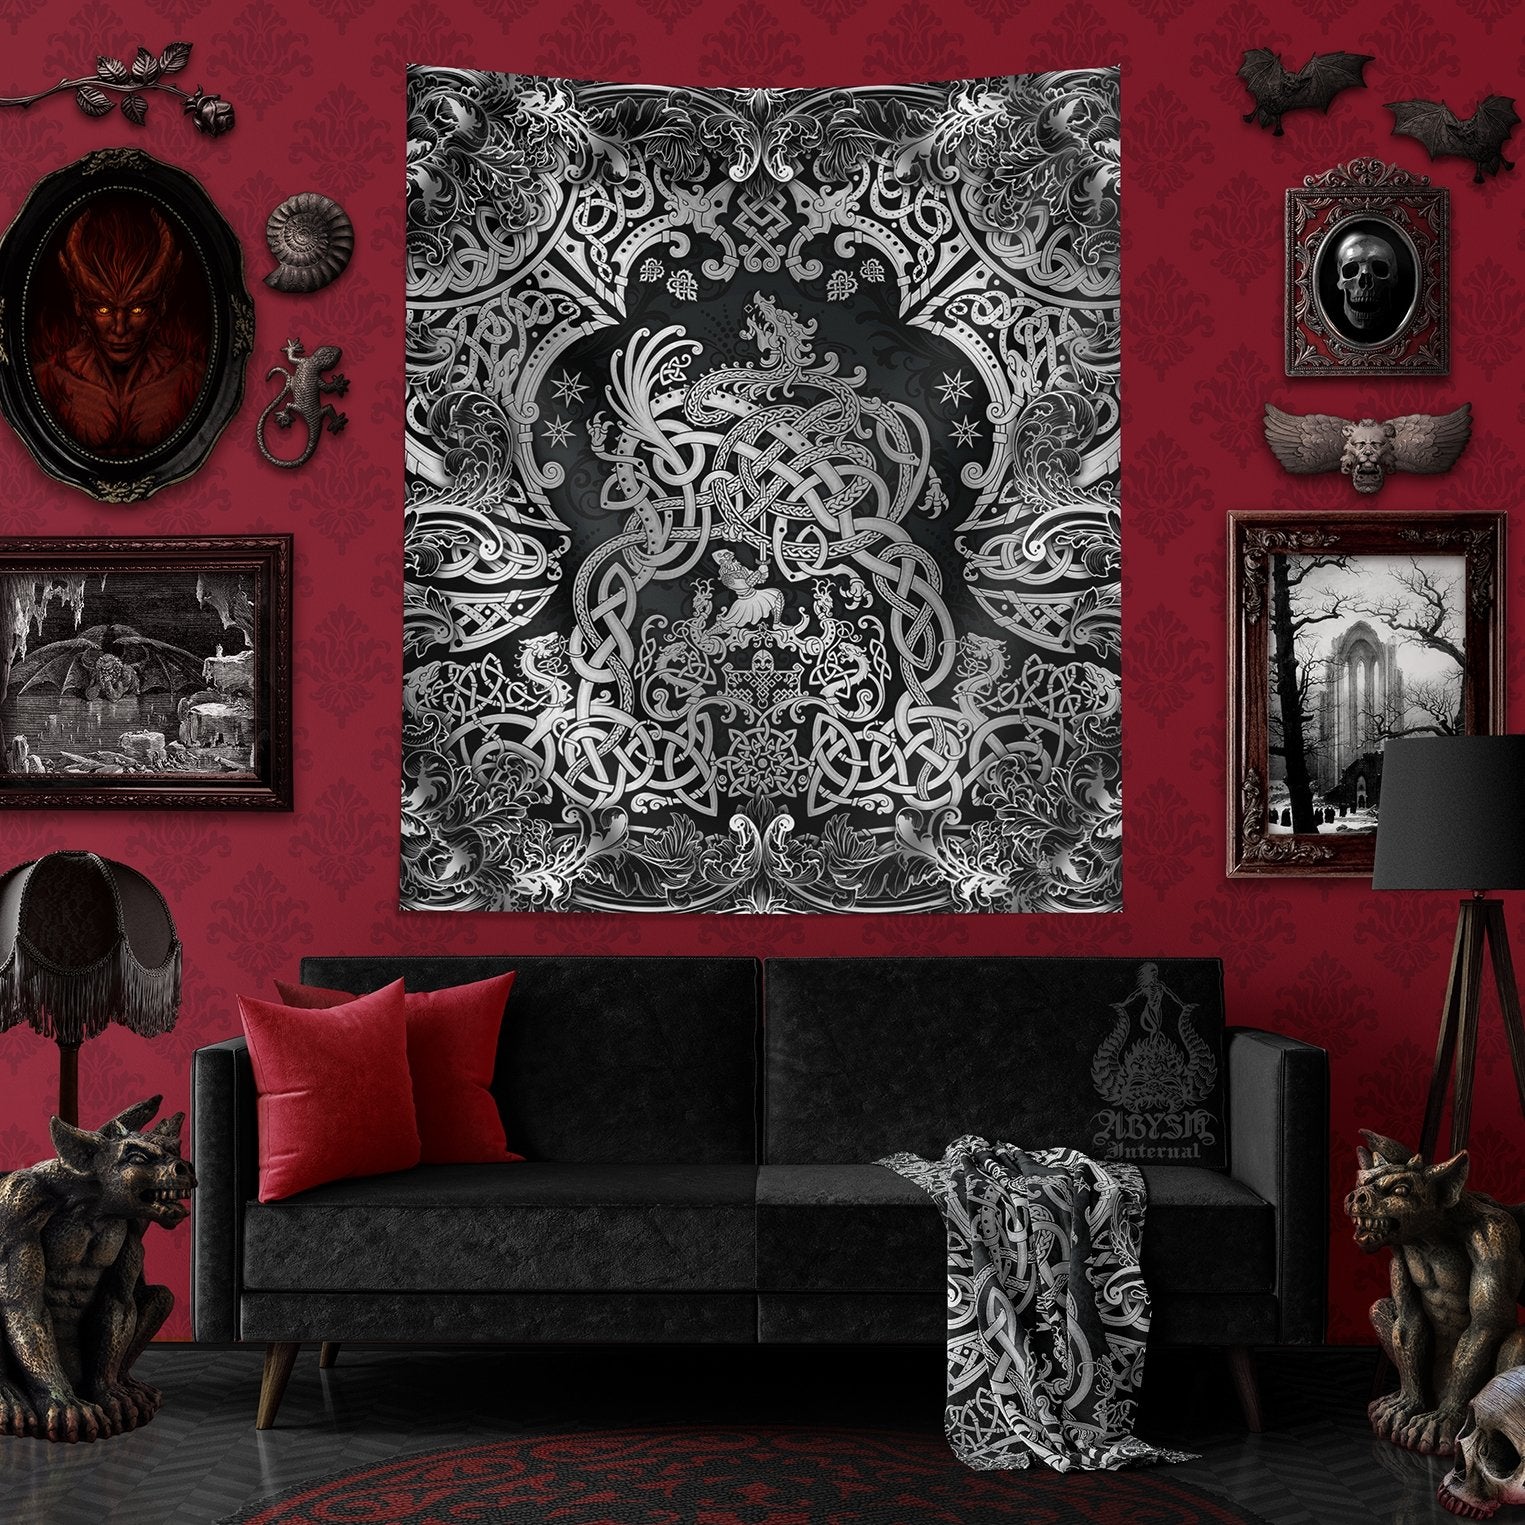 Slays Fabric, Wallpaper and Home Decor